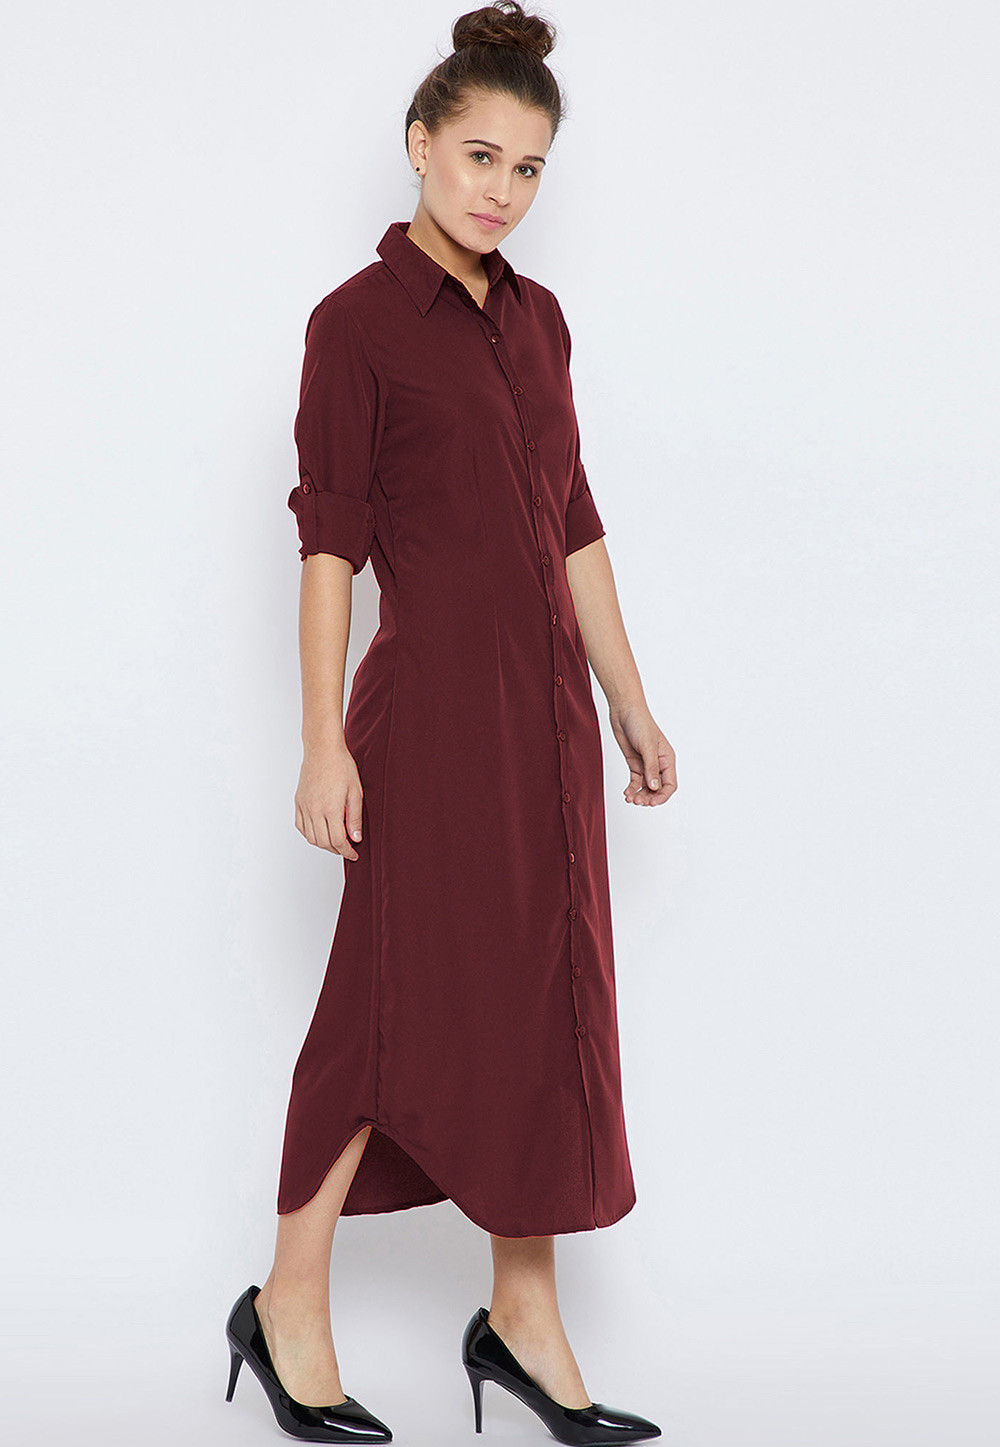 Solid Color Rayon Dress in Maroon : TVE863